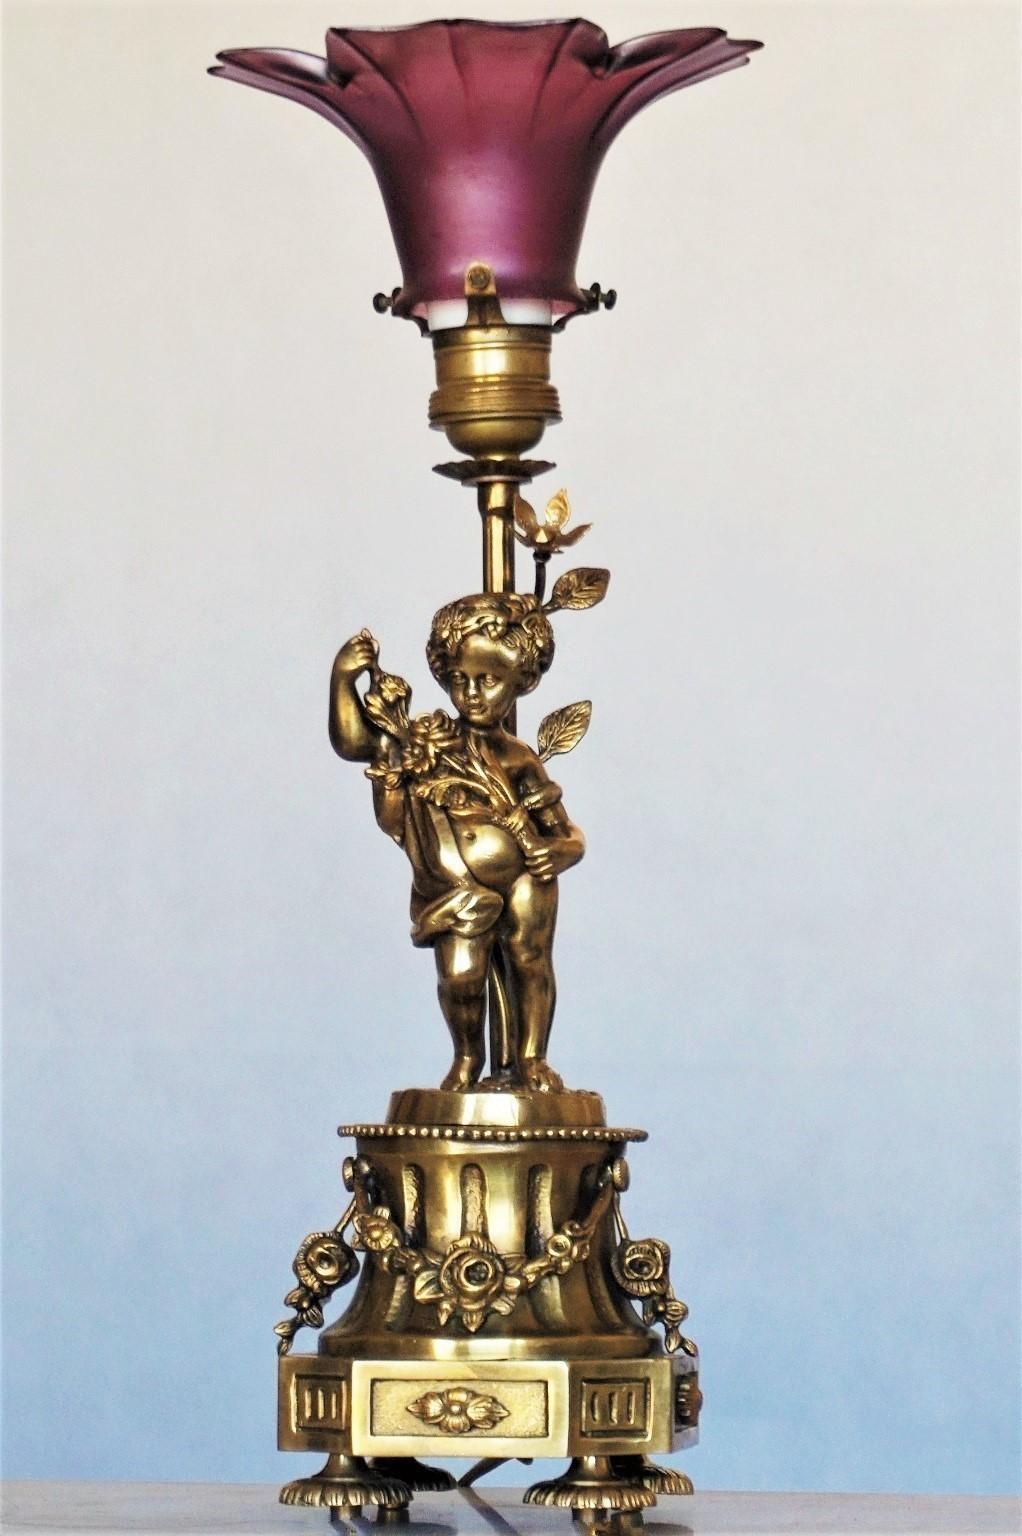 Heavy French Art Nouveau solid gilt bronze table lamp, cherub holding a branch of flowers, raised on richly ornate plinth base decorated with floral garlands, with purple vaseline glass tulip lampshade, 1910-1920.
One E-27 brass and porcelain light